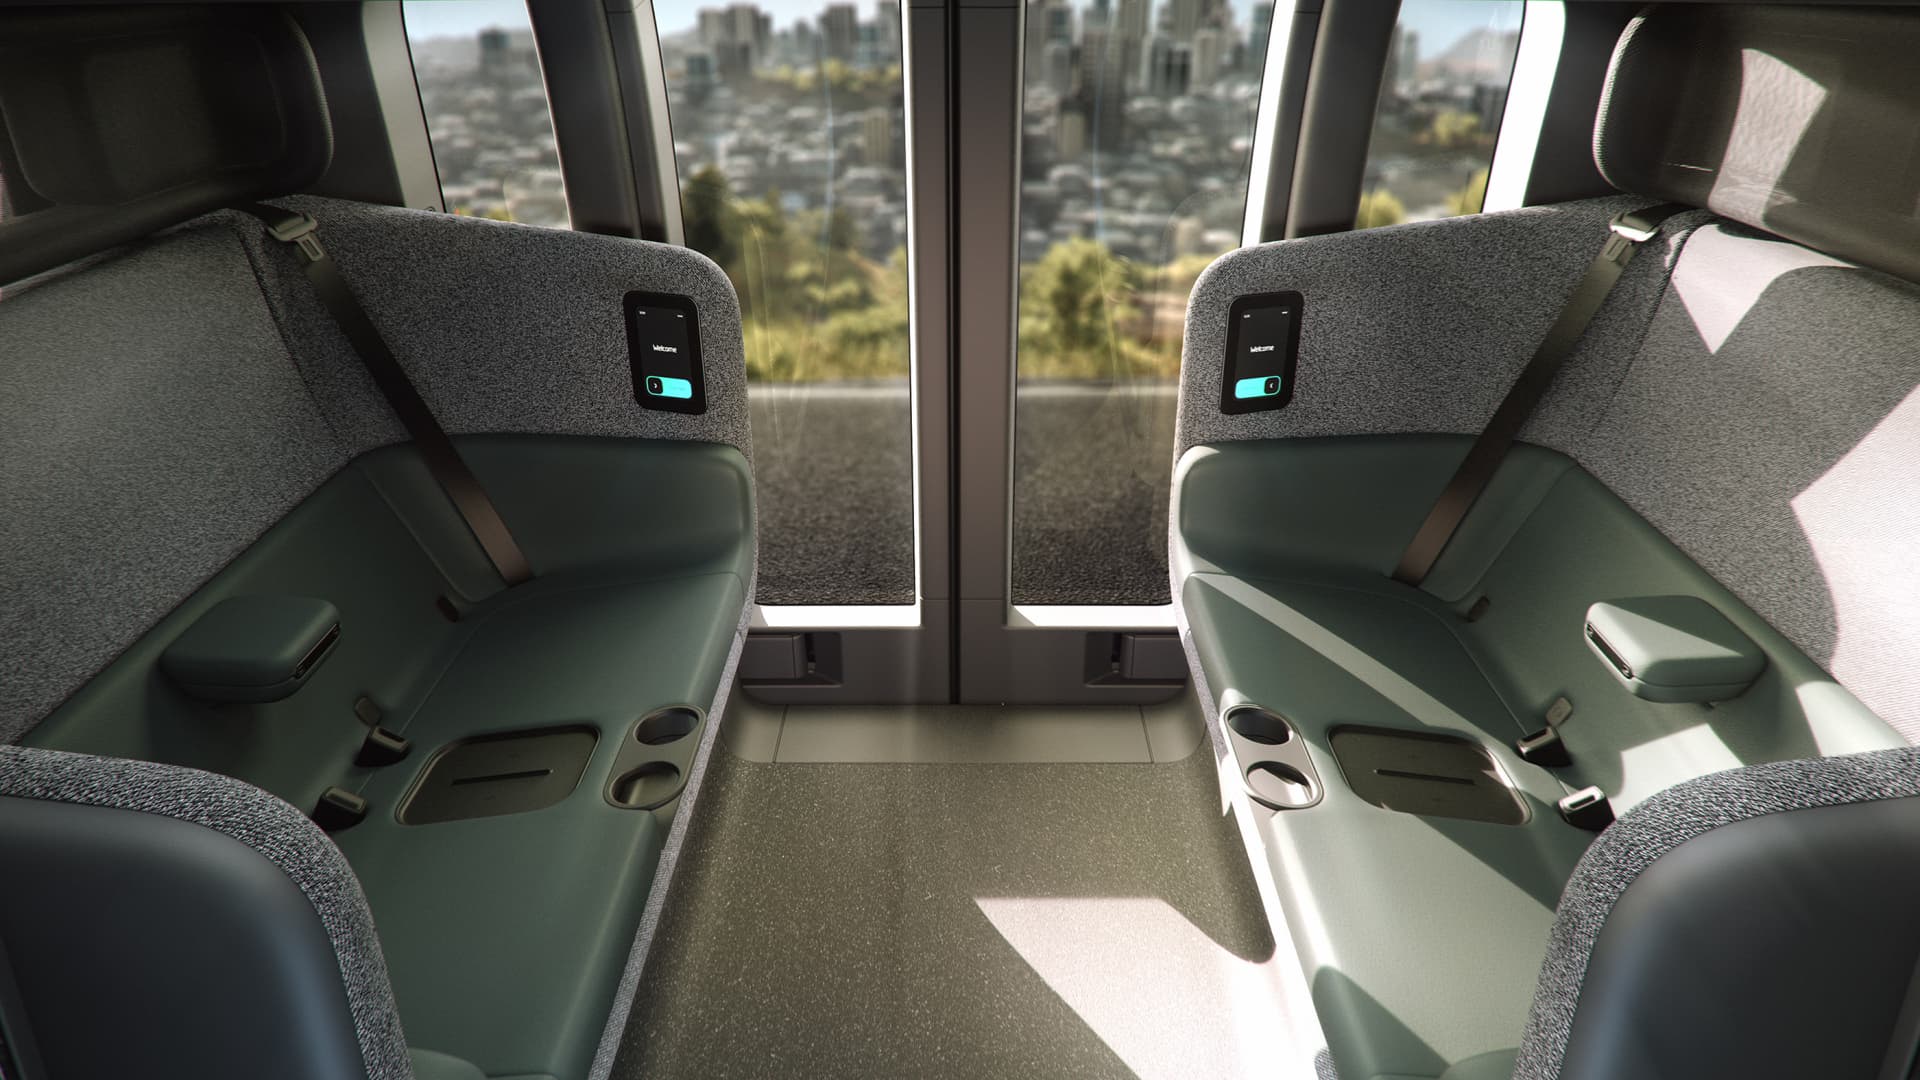 Zoox's autonomous carriage has space for up to four passengers.